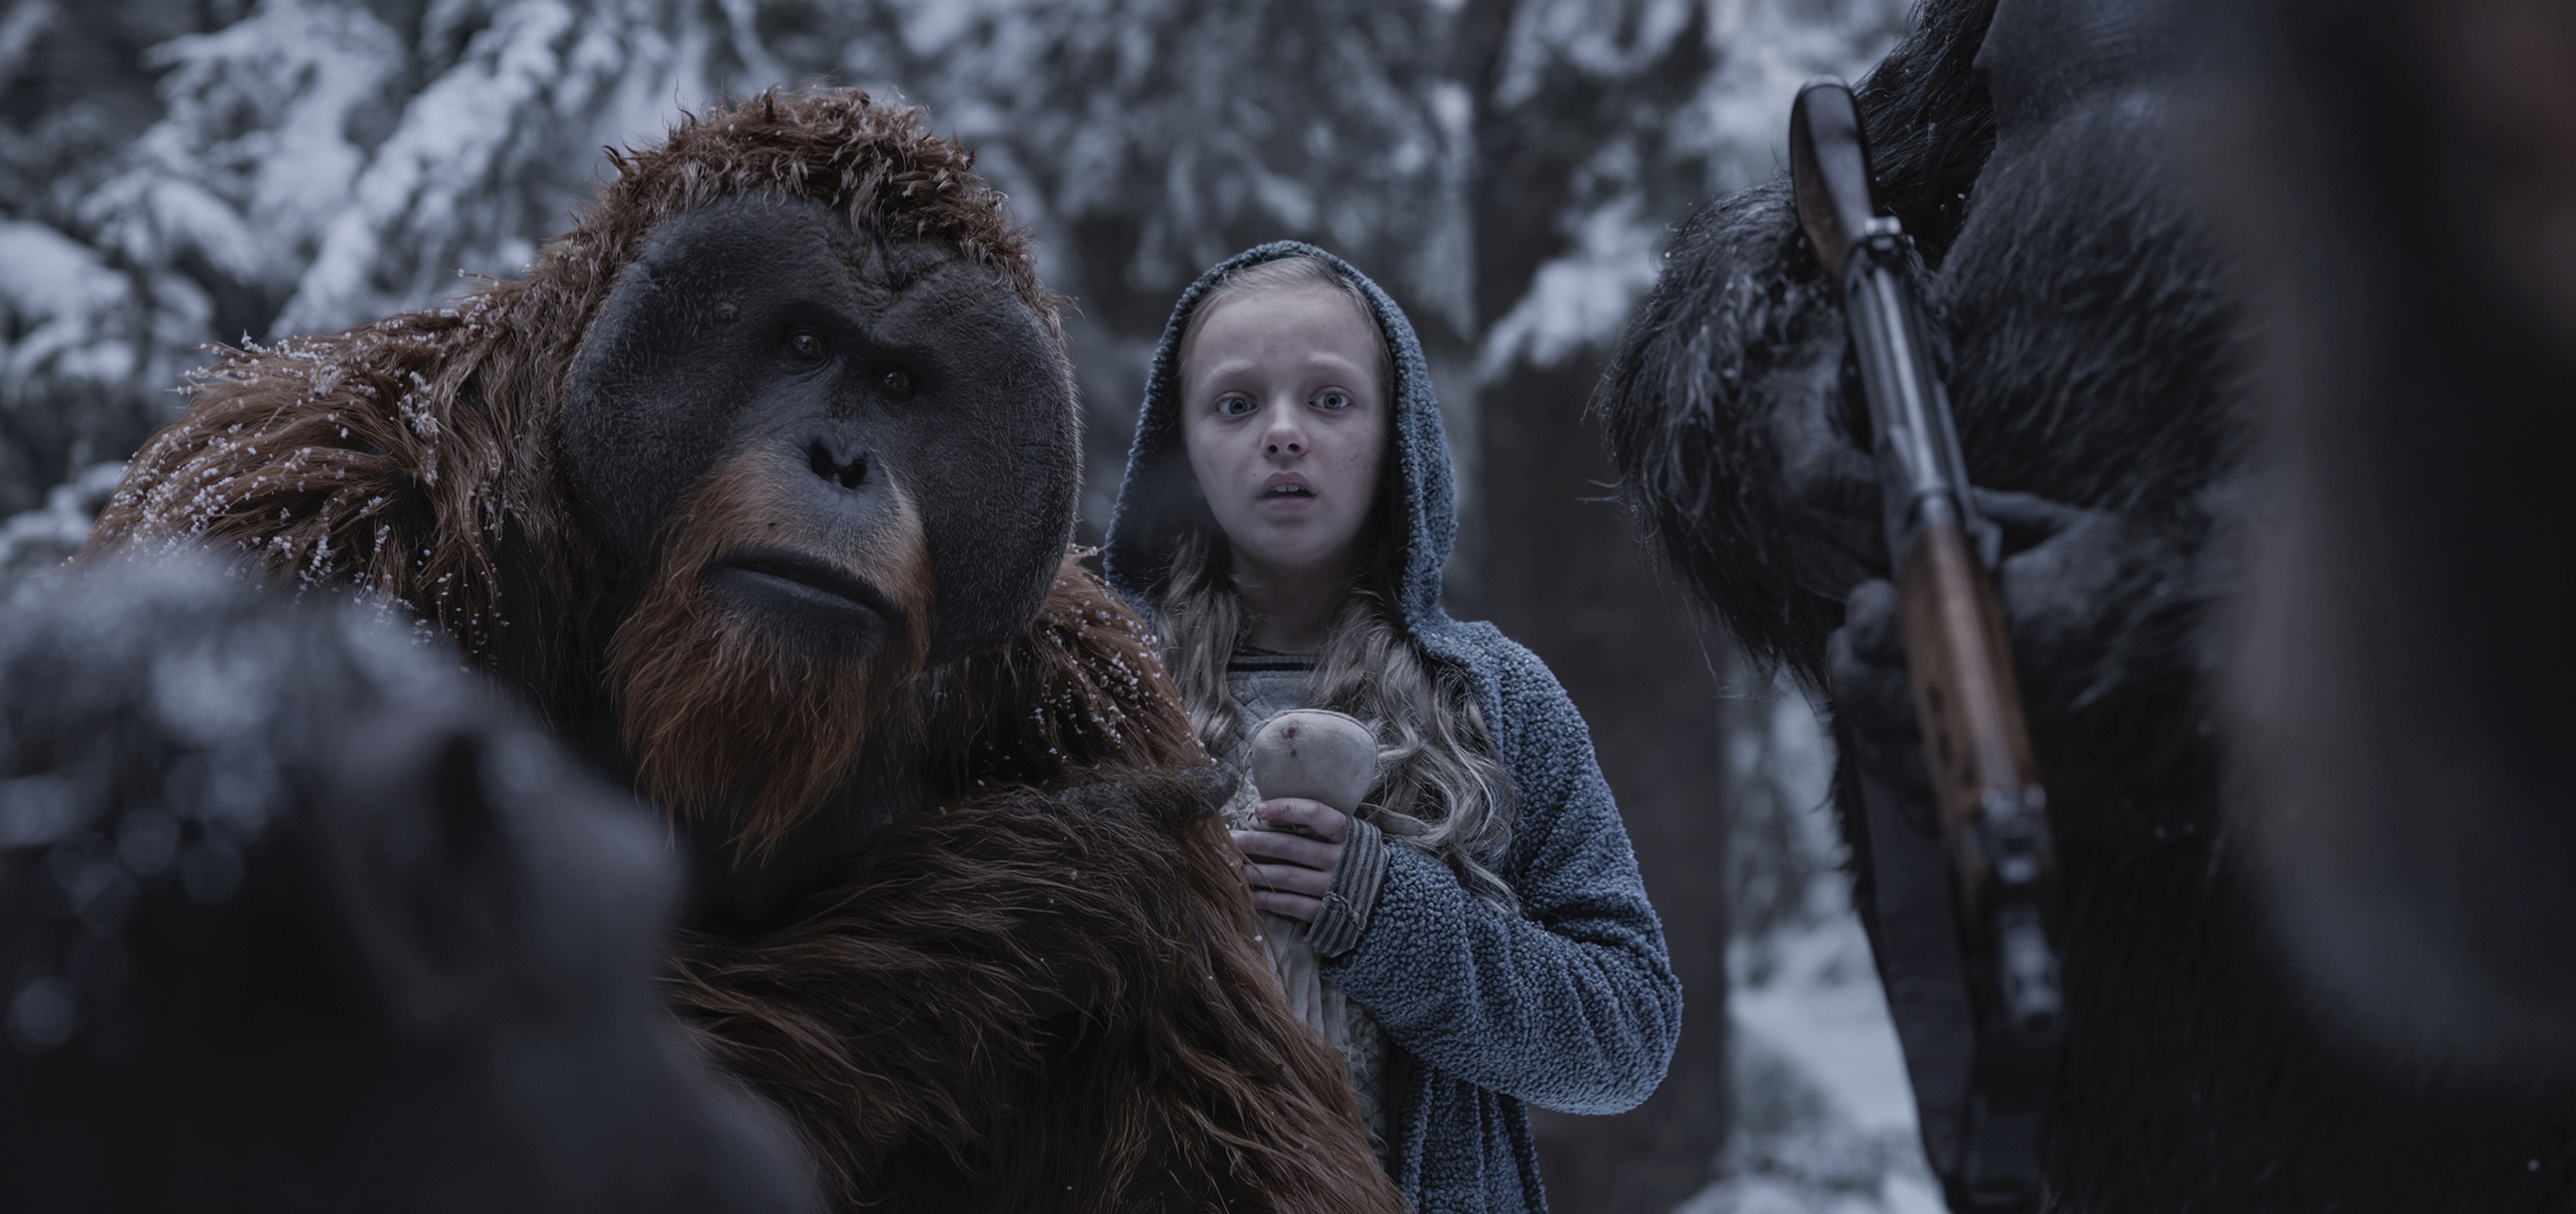 Movie War For The Planet Of The Apes HD Wallpaper | Background Image